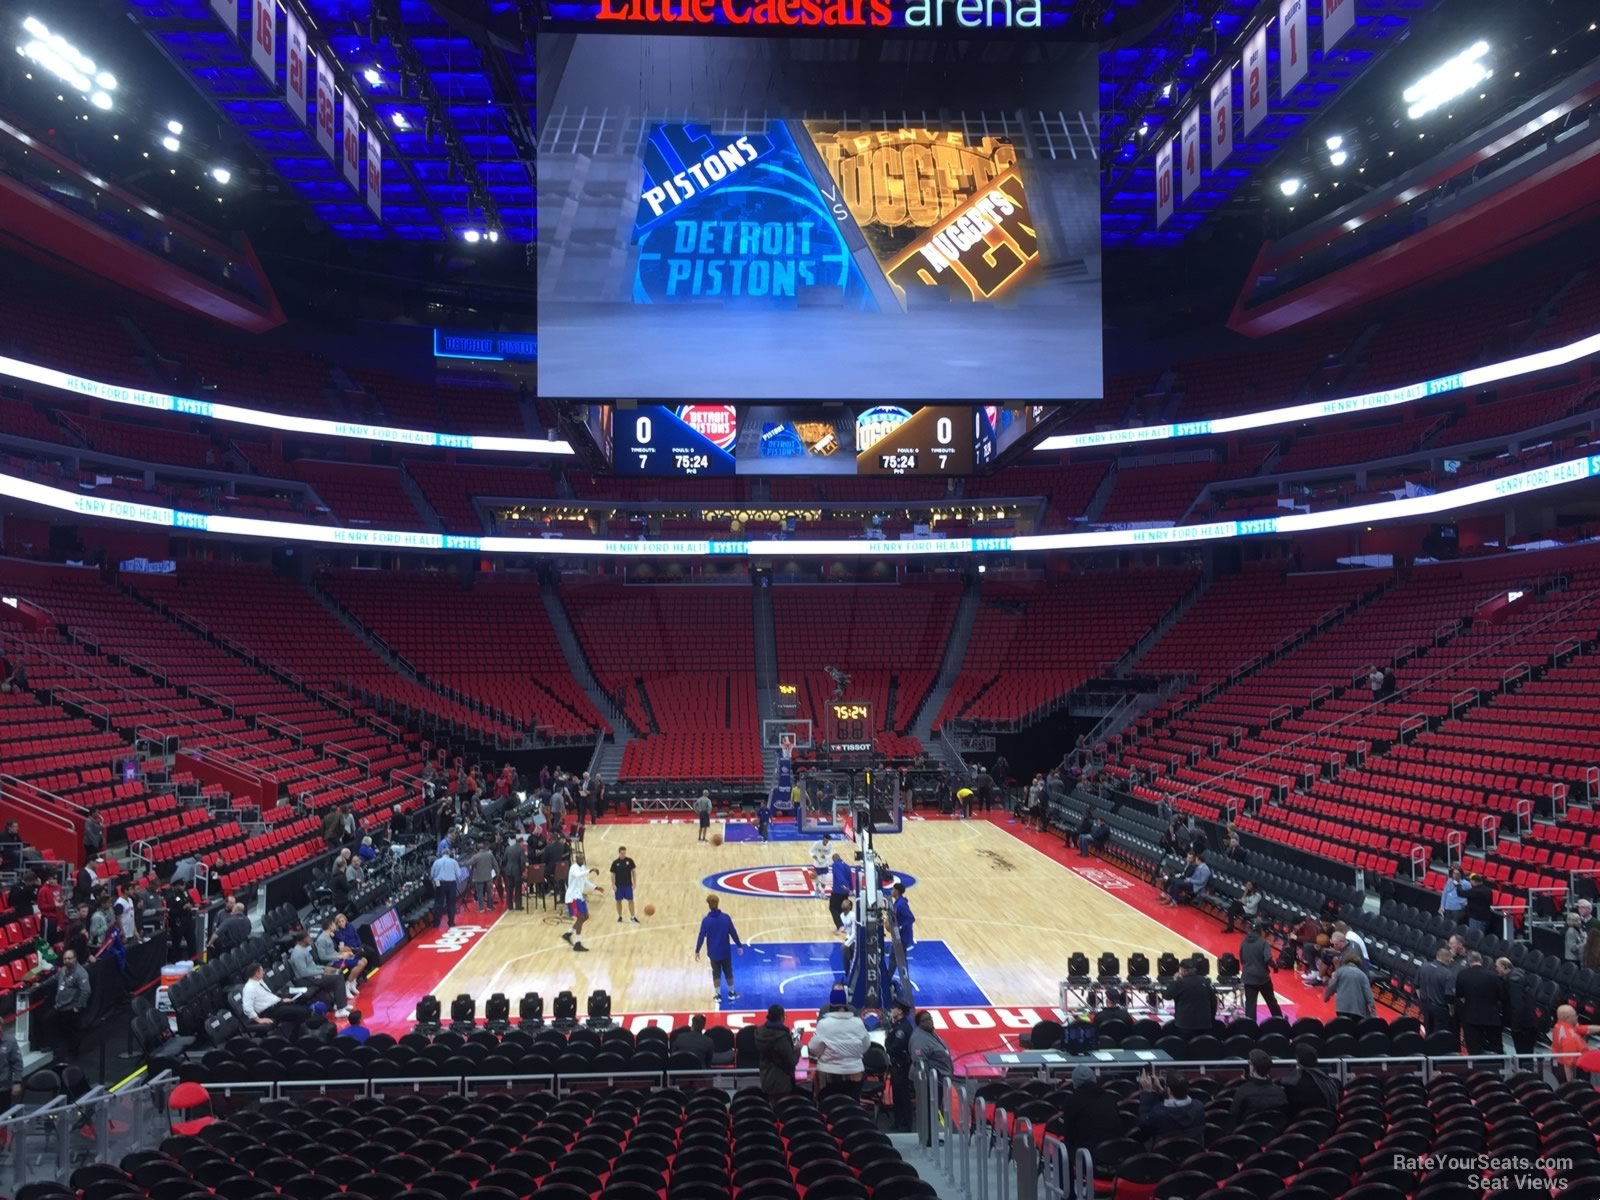 section 116, row 10 seat view  for basketball - little caesars arena